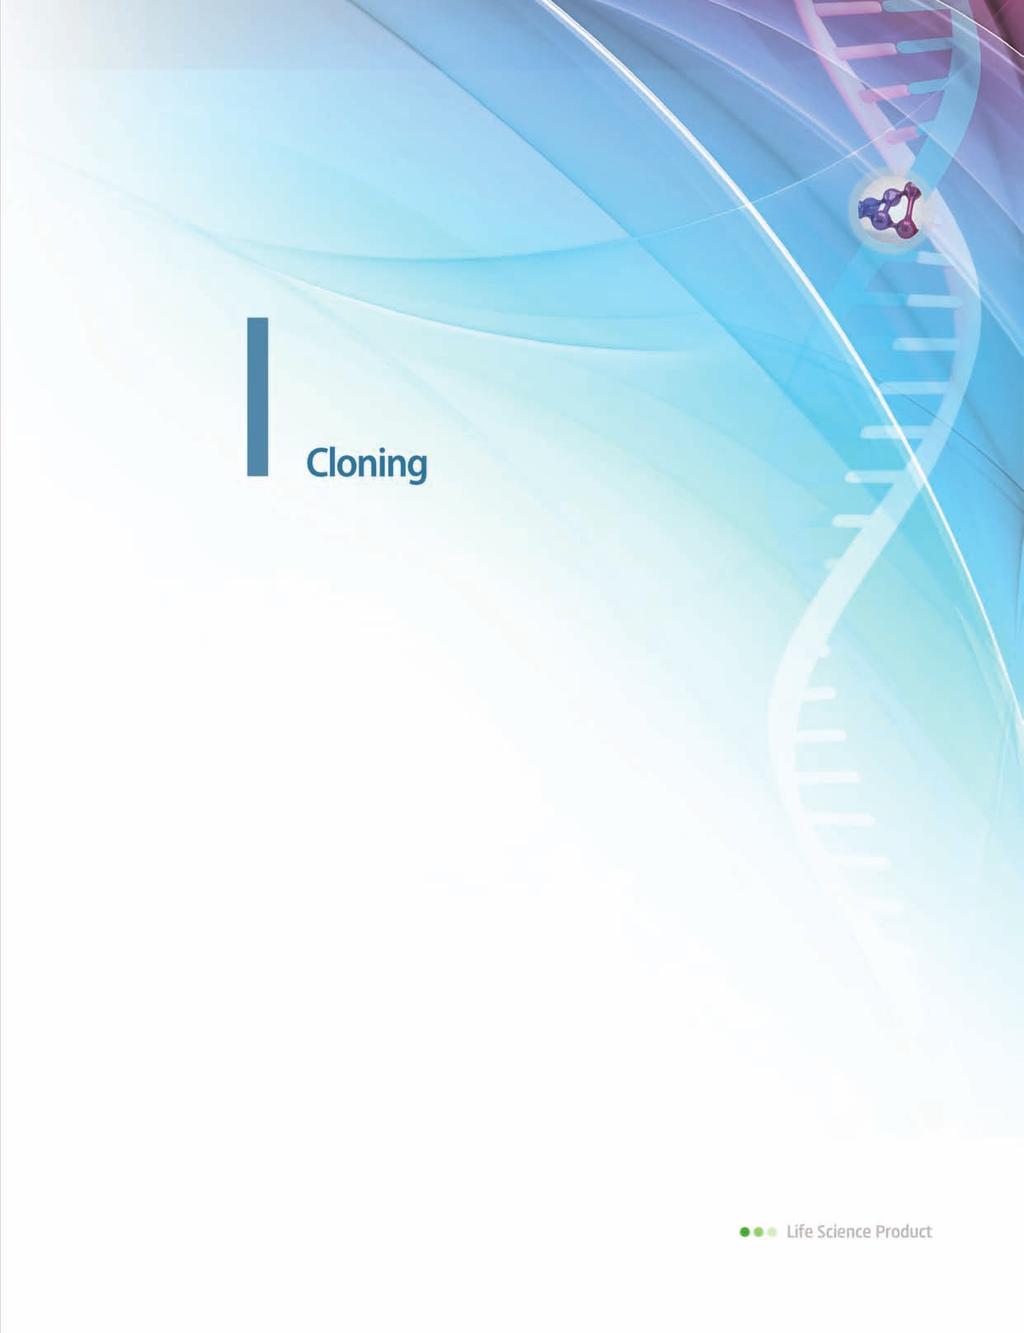 Cloning DNA Amplification DNA Preparation Cloning (Cloning Kit & Gene Cloning Service) Phone: 042-930-8793 Email: genesynthesis-support@bioneer.co.kr Cloning (Ligase) Phone: 1588-9788 (ext.